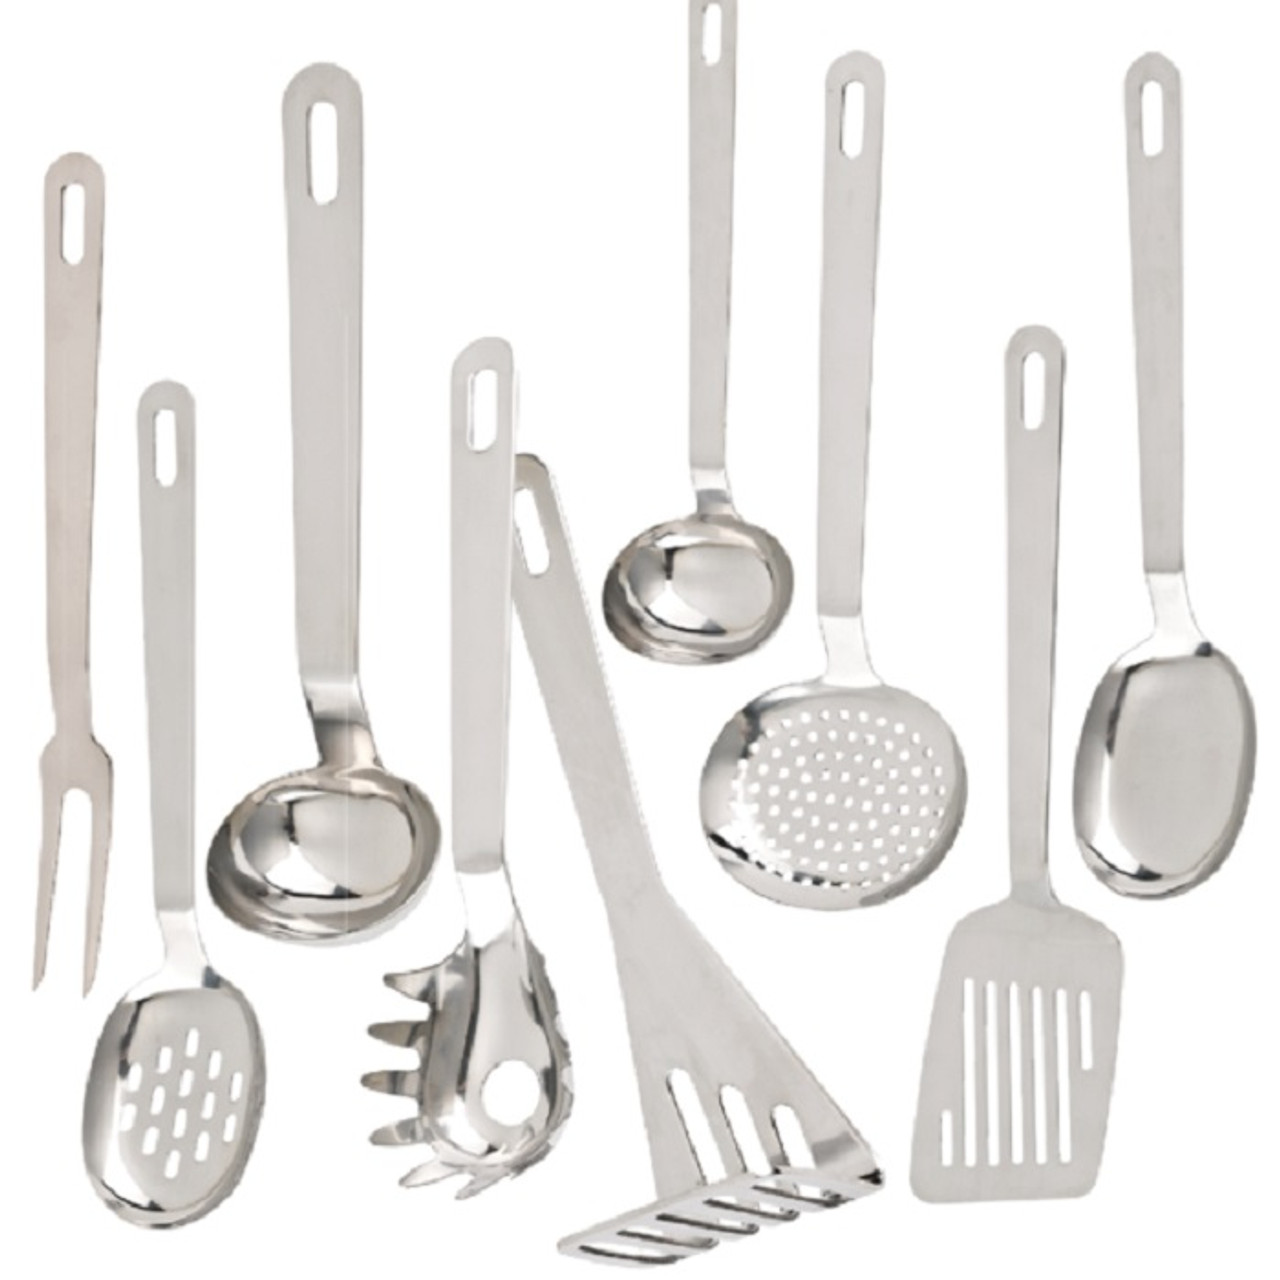 Better Houseware Avanti Cook and Serve Collection - Stainless Steel Nickle Free 